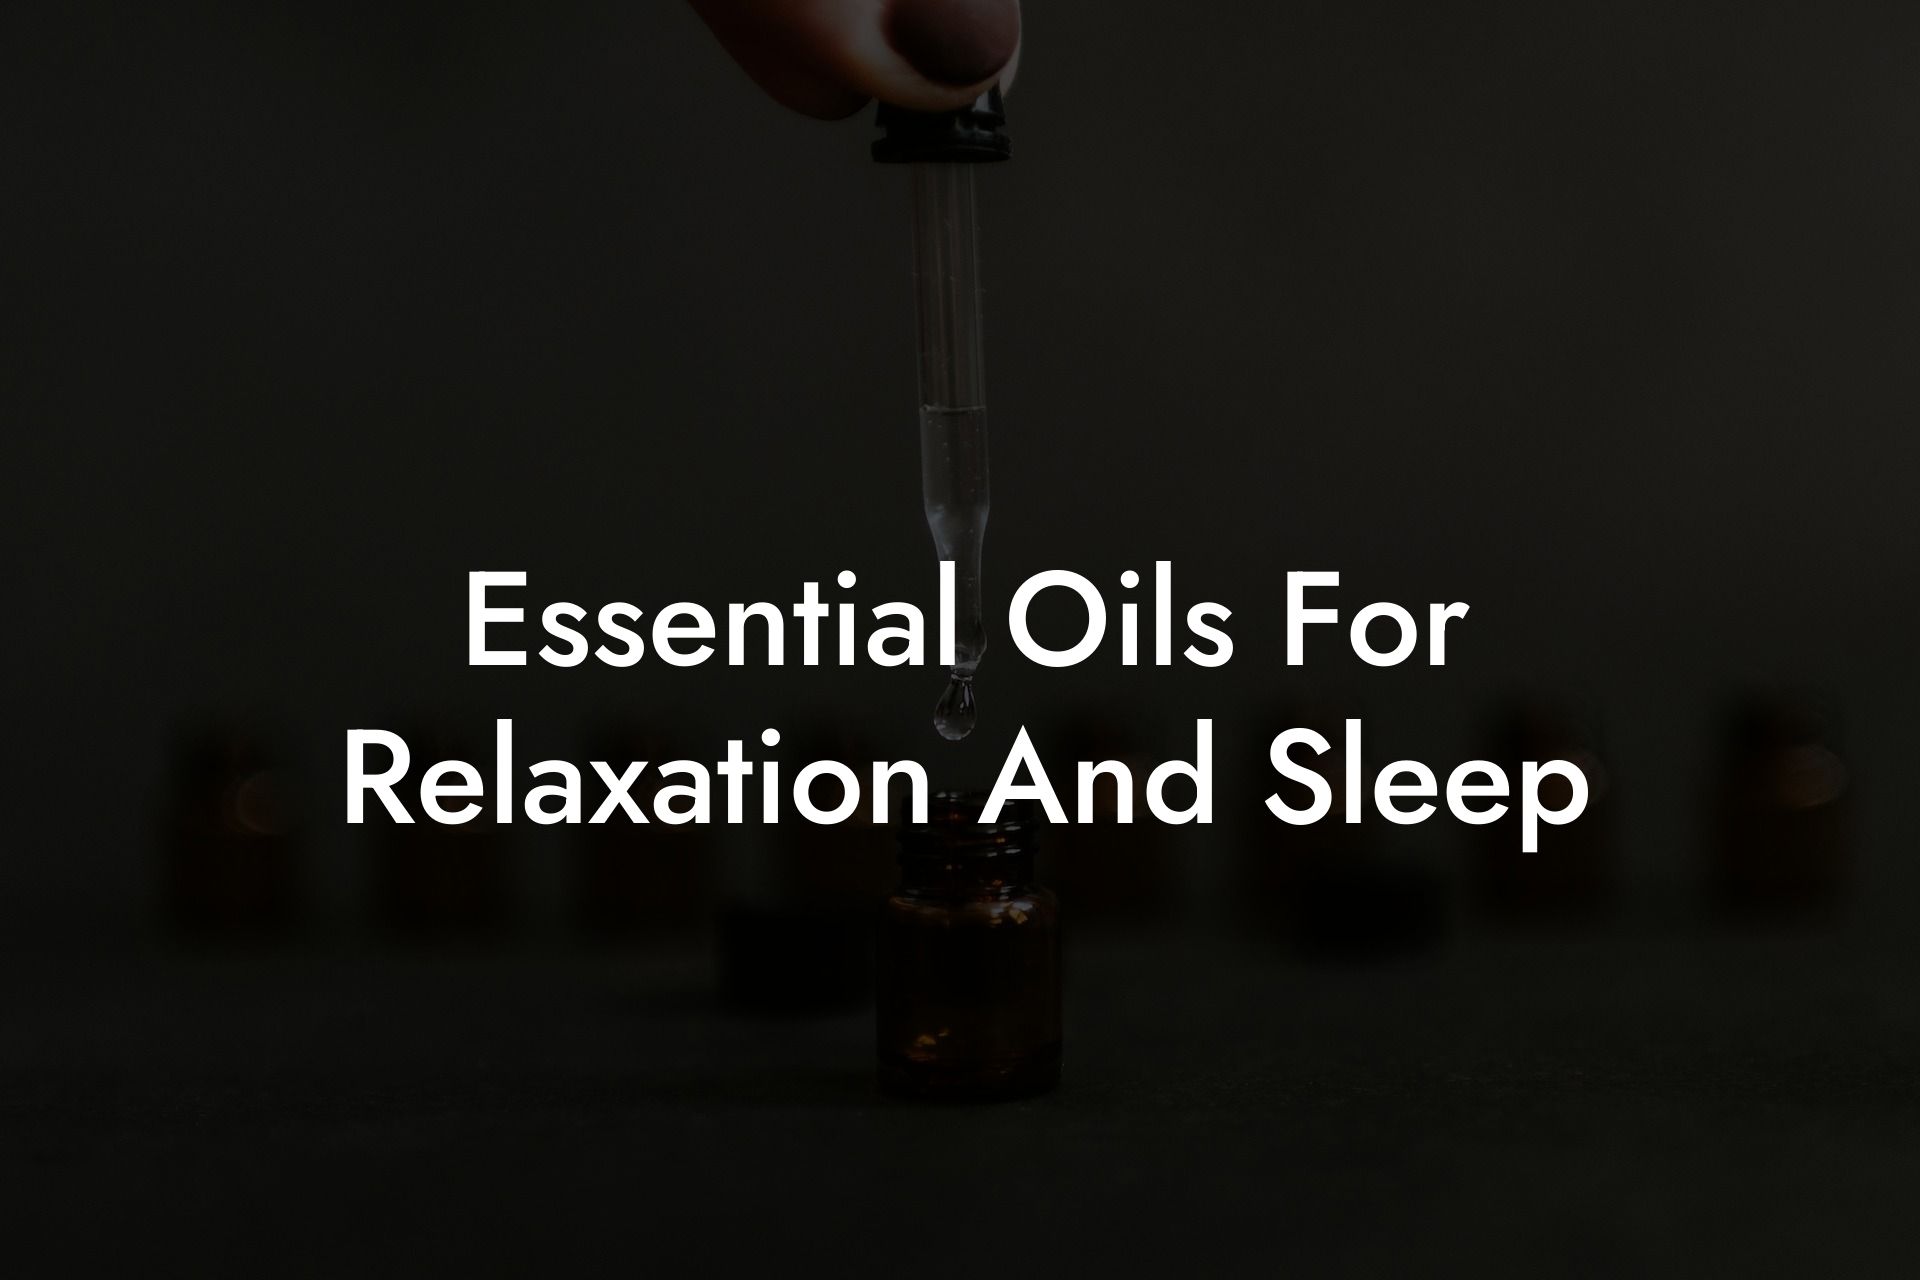 Essential Oils For Relaxation And Sleep